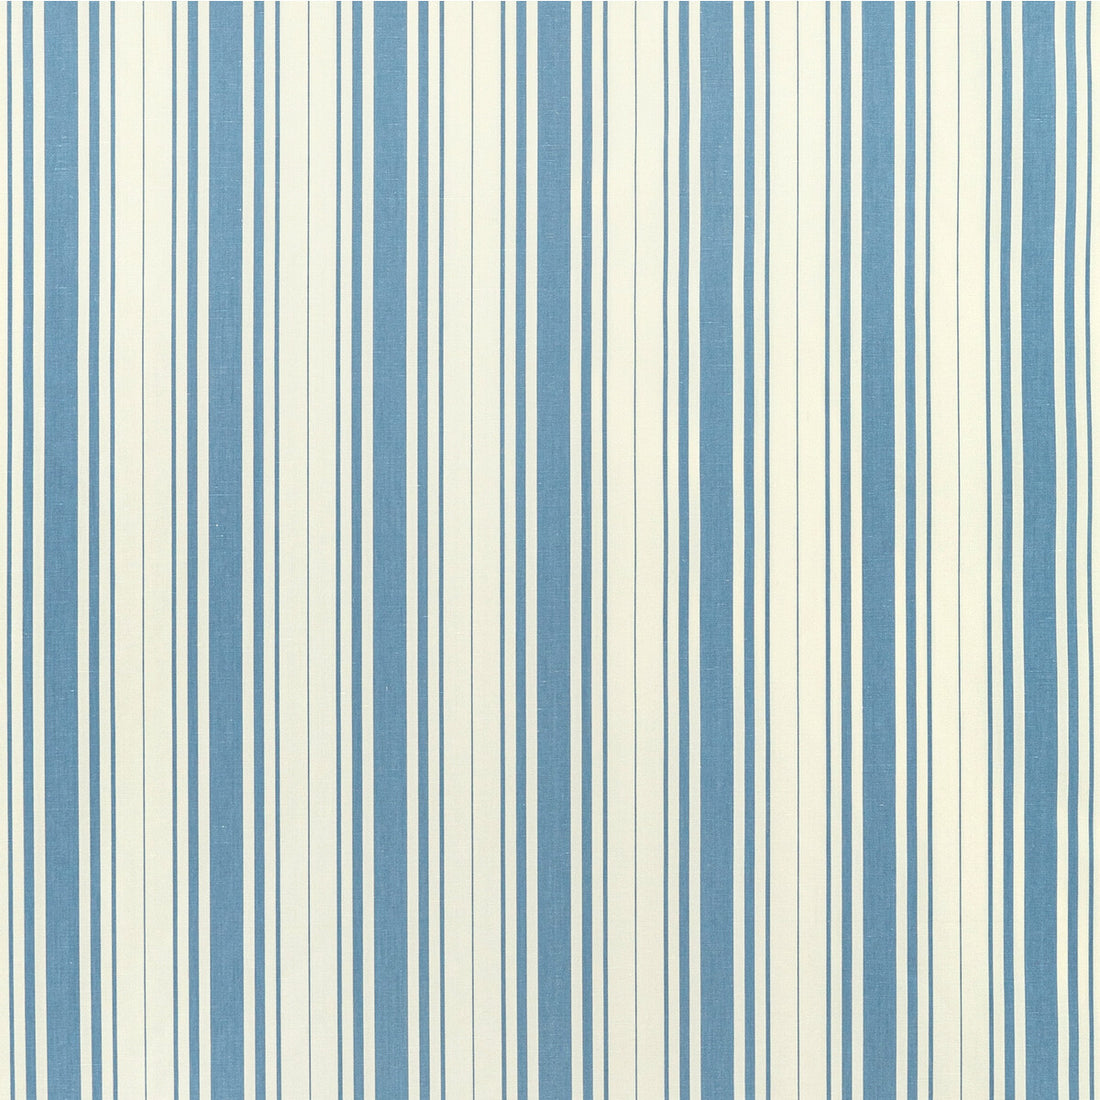 Baldwin Stripe fabric in blue color - pattern 2022100.5.0 - by Lee Jofa in the Sarah Bartholomew collection